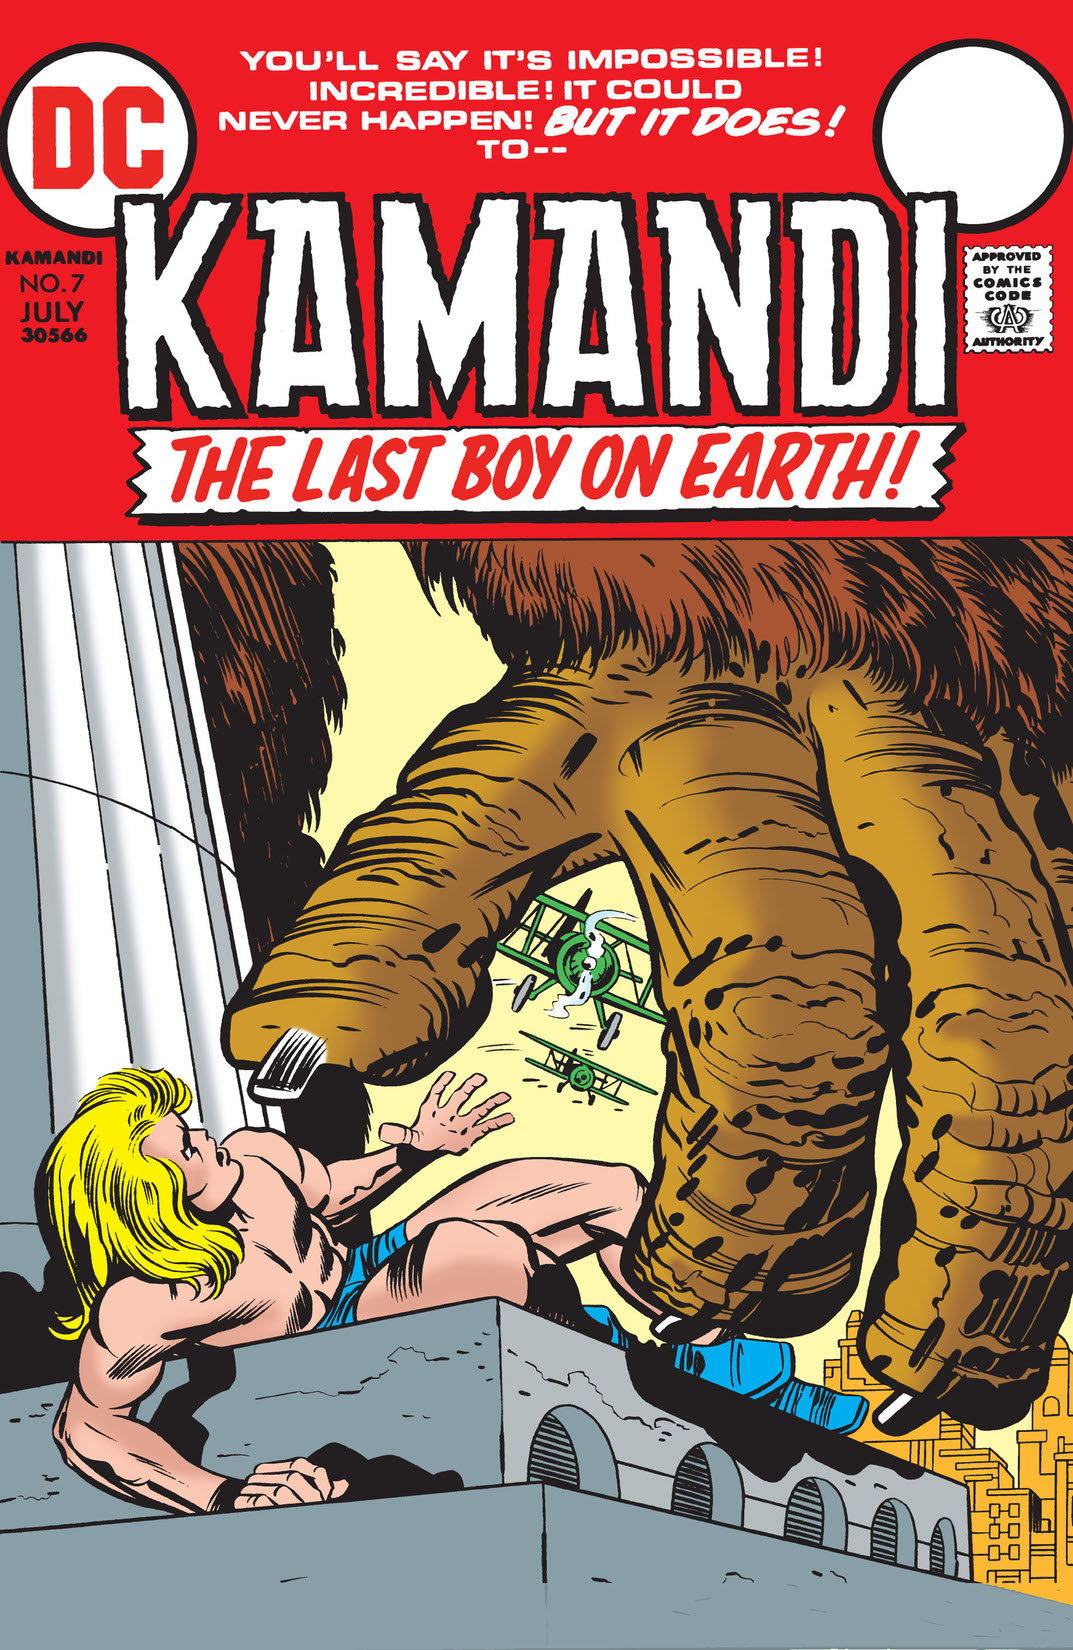 Kamandi: The Last Boy on Earth #7 preview images